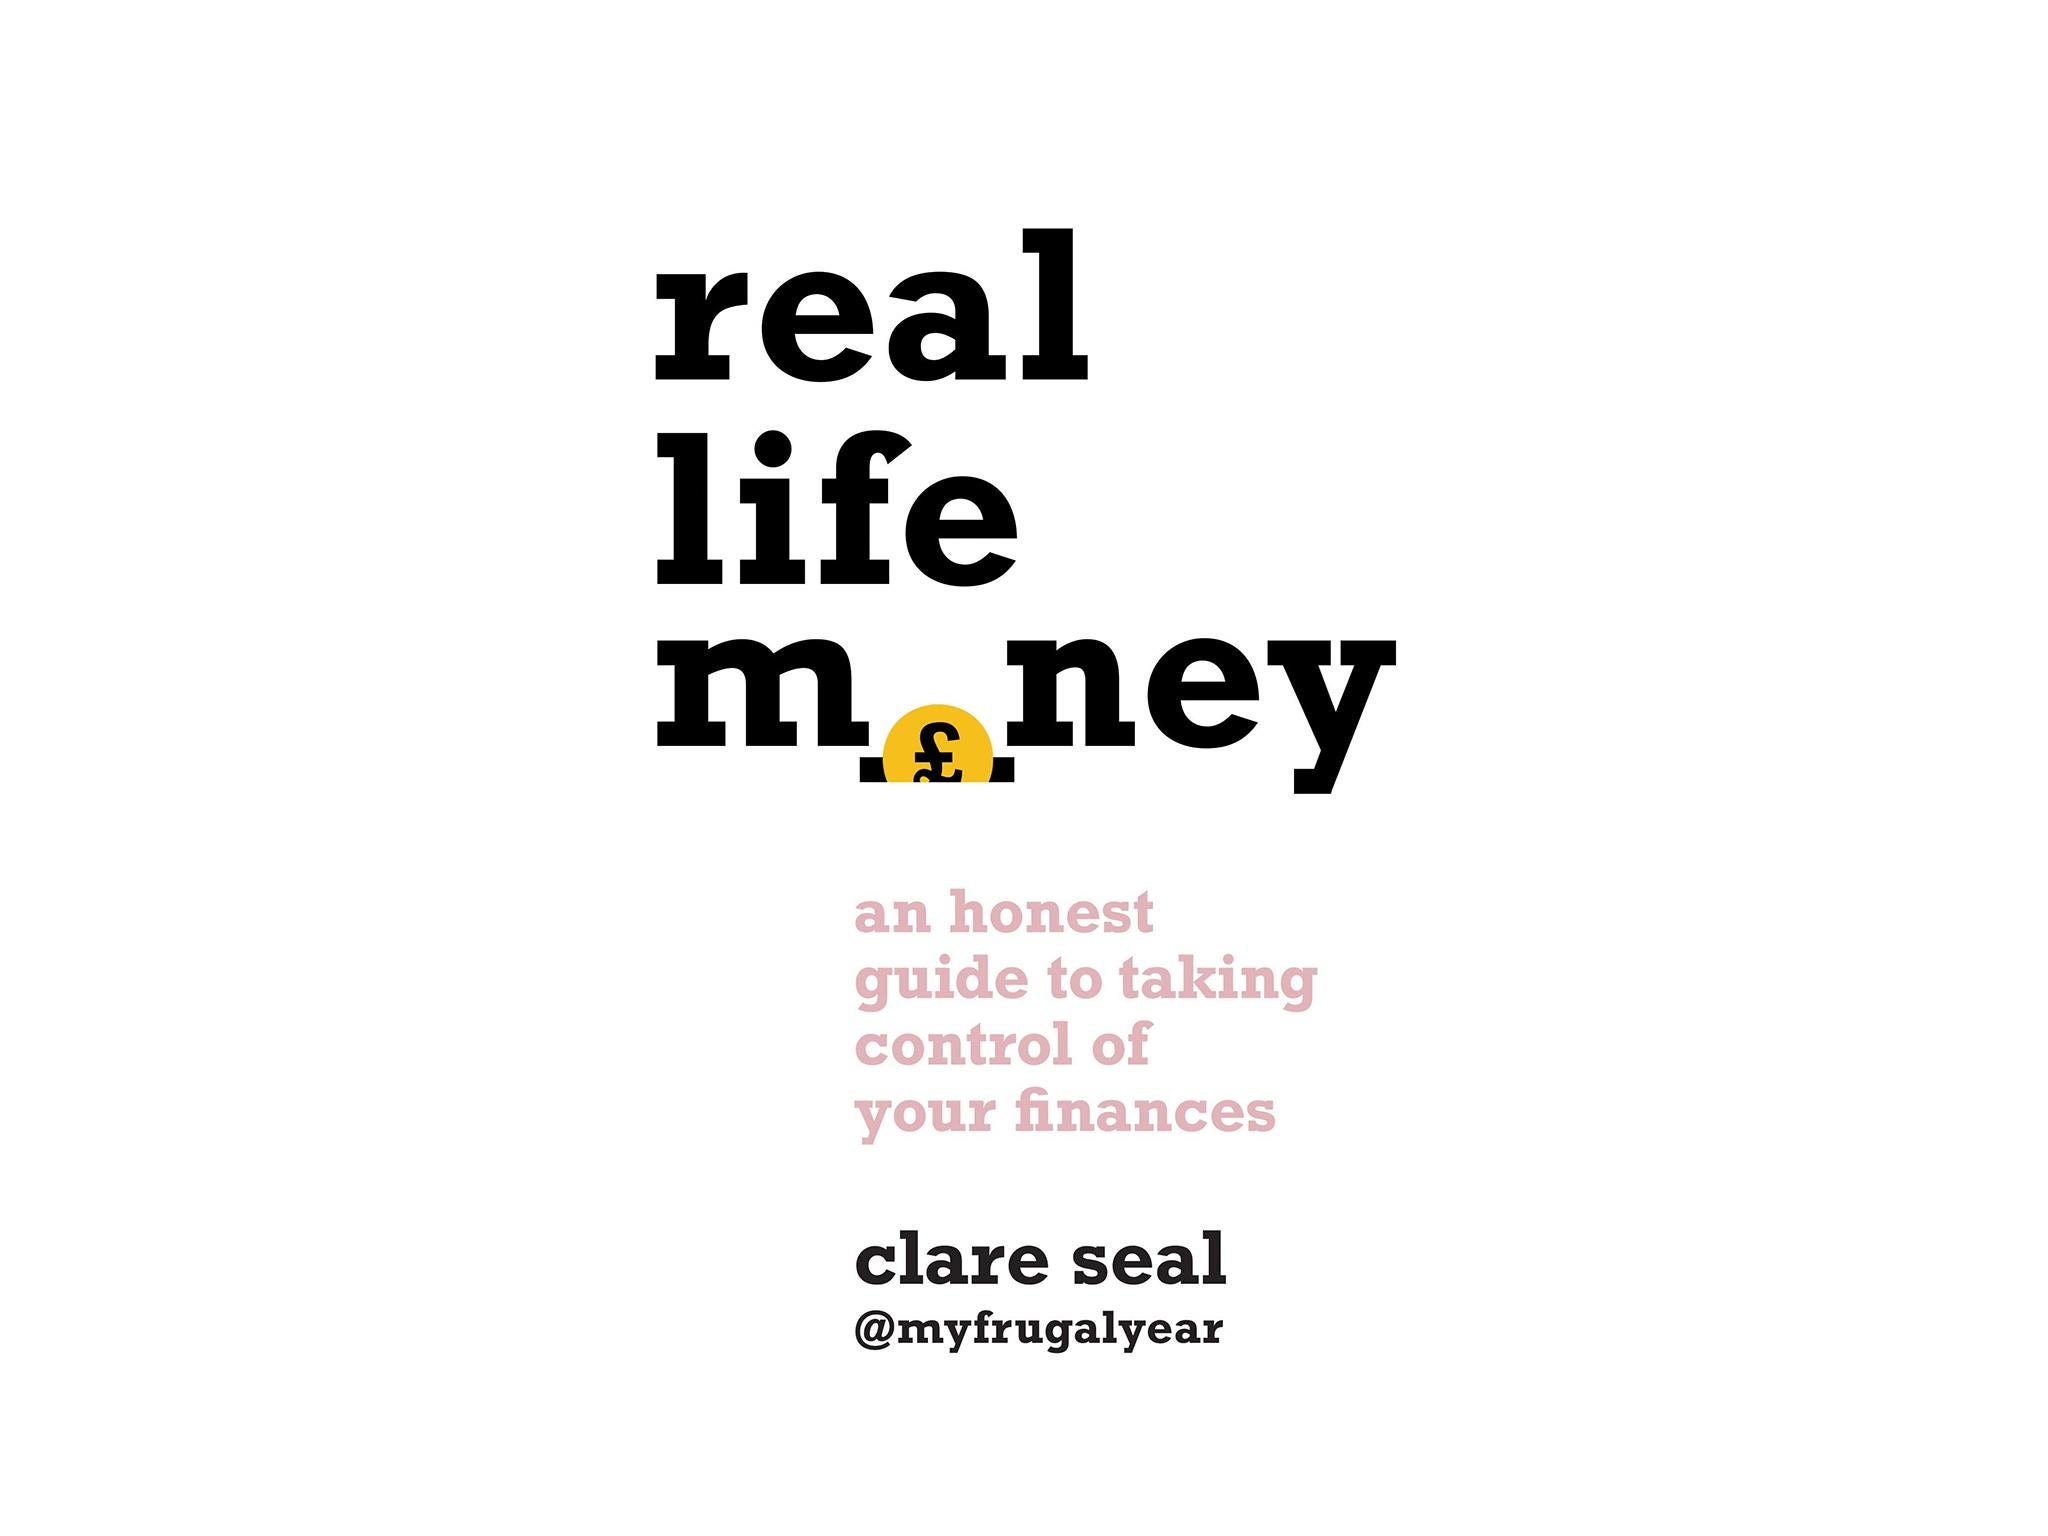 real-life-money-an-honest-guide-to-taking-control-of-your-finances-by-clare-seal.-published-by-headline-Best personal finance books about money IndyBest.jpg